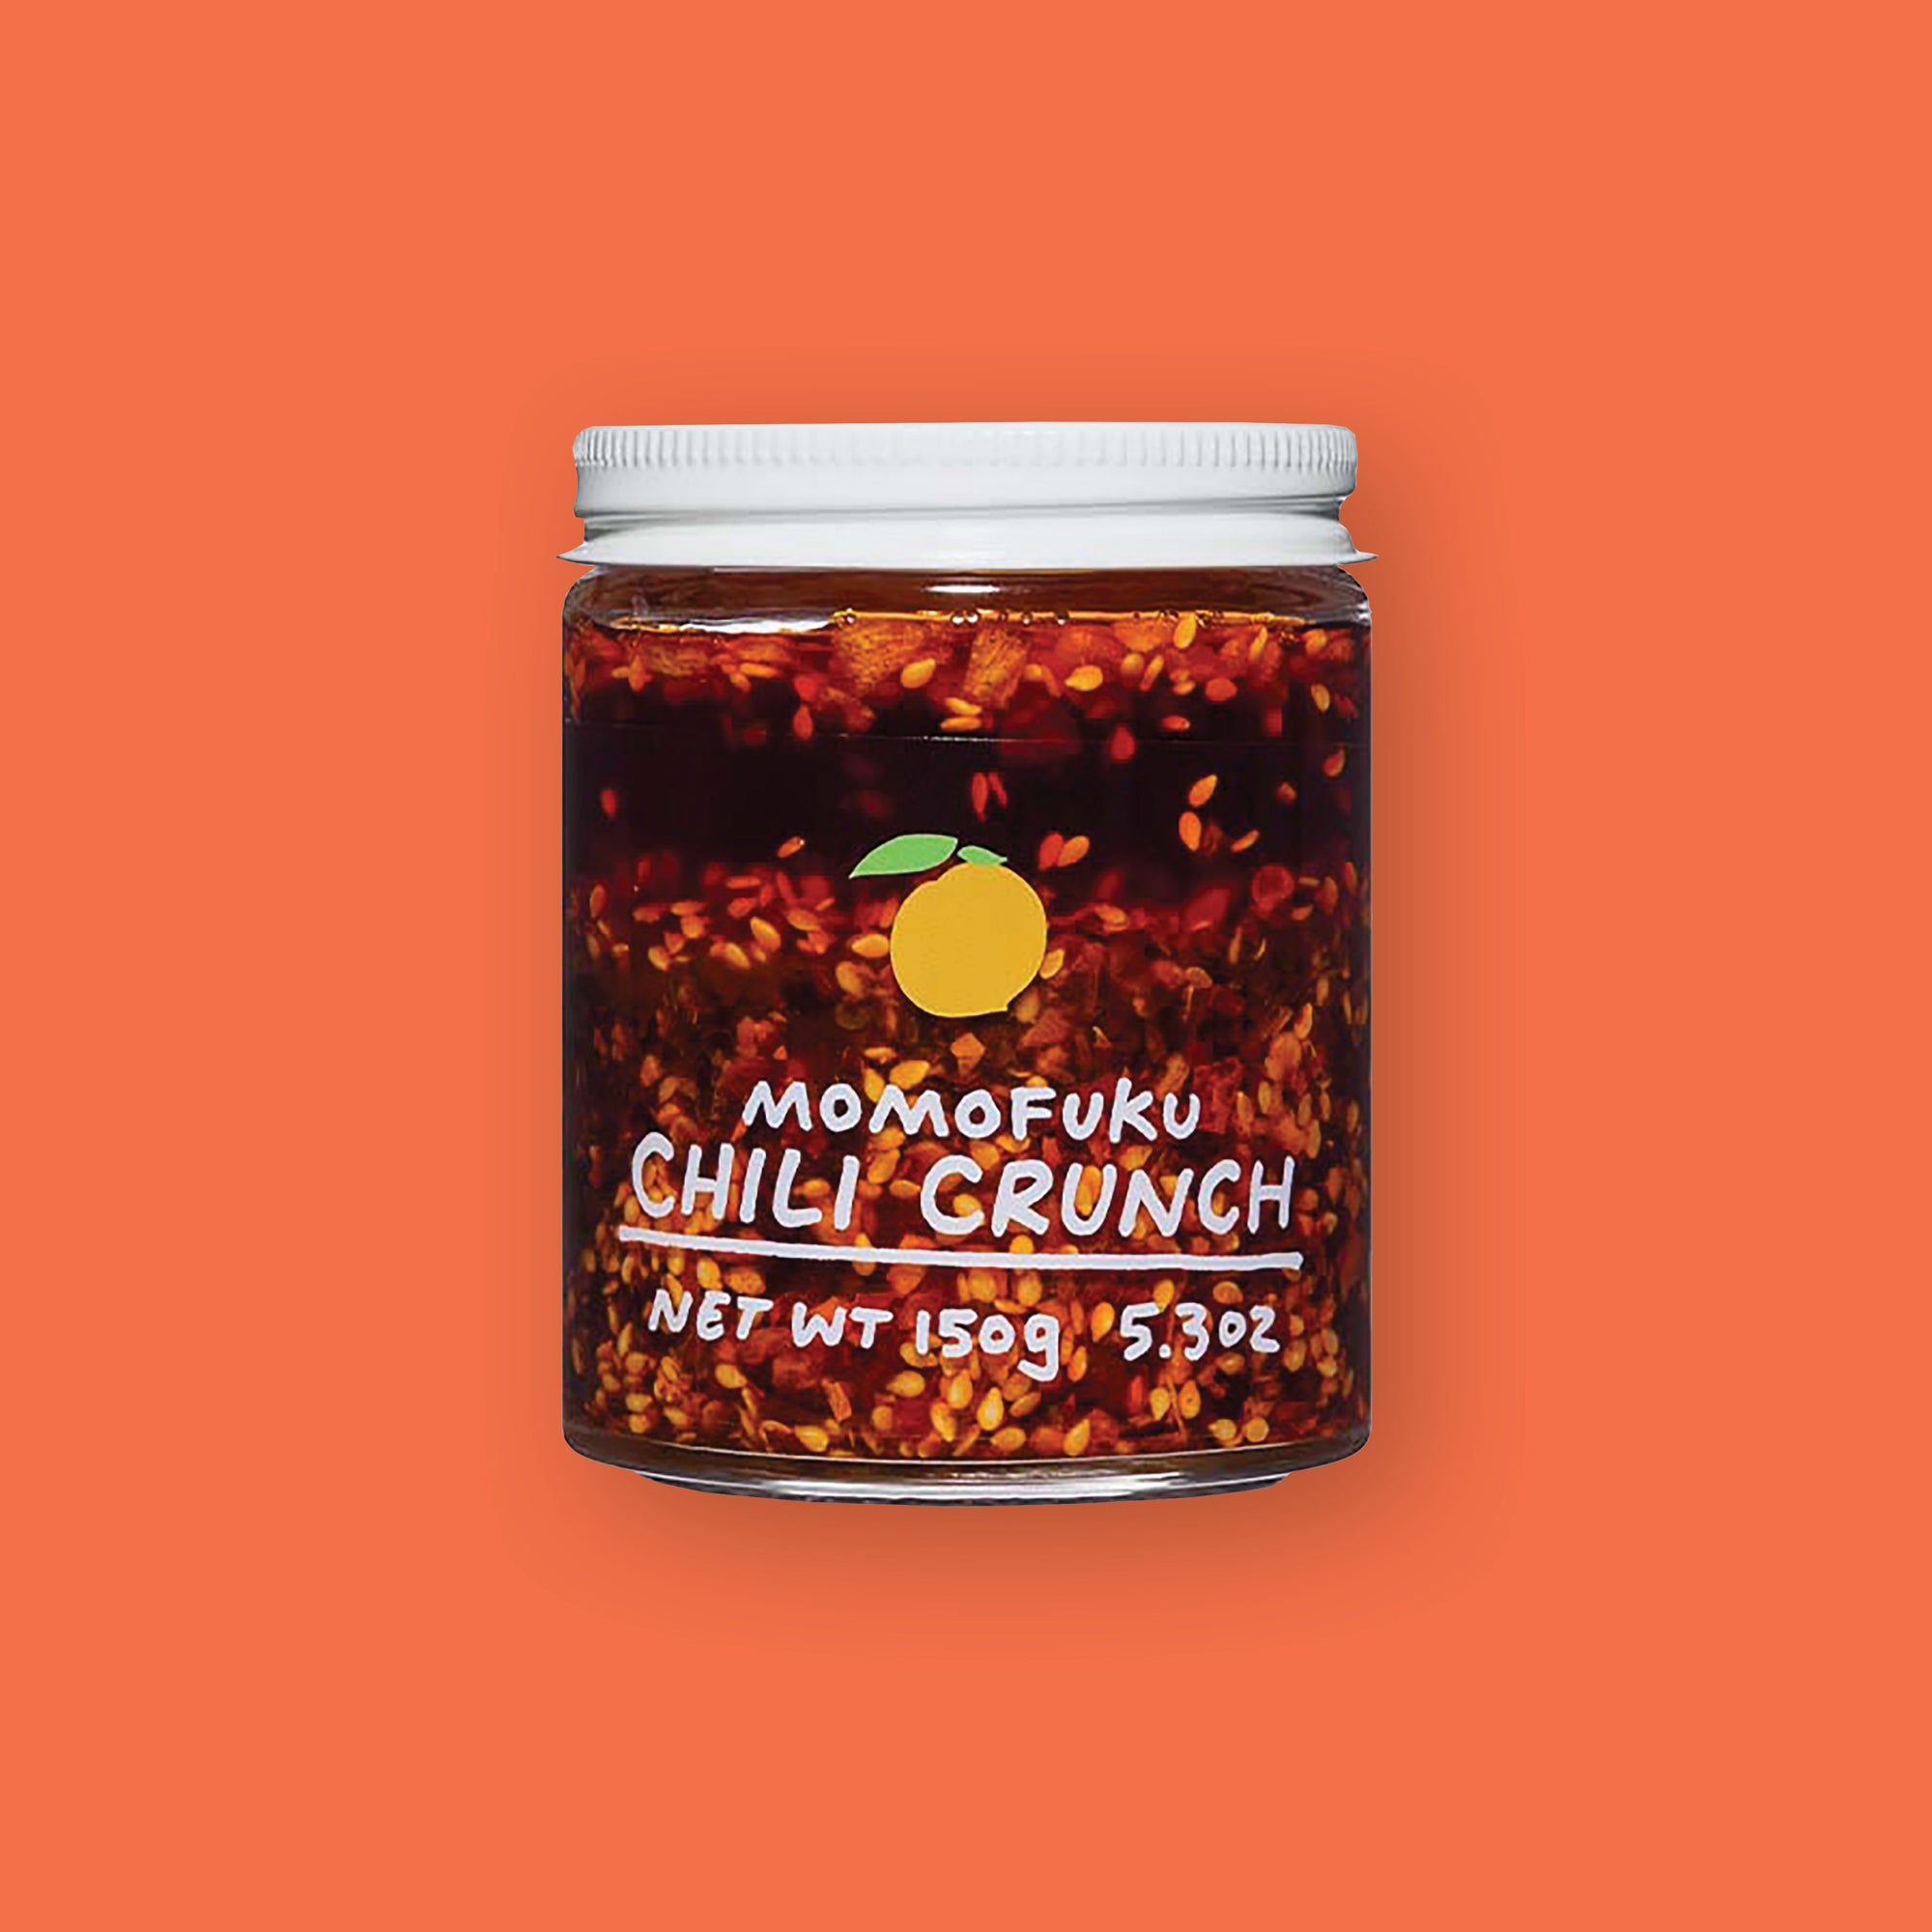 On an orangey-red background sits a jar. This clear jar has a white lid and is filled with chili seeds and liquid. On the front is an illustration of a yellow lemon and it says in white "MOMOFUKU CHILI CRUNCH" underlined in handwritten lettering. Net wt 150g 5.3oz